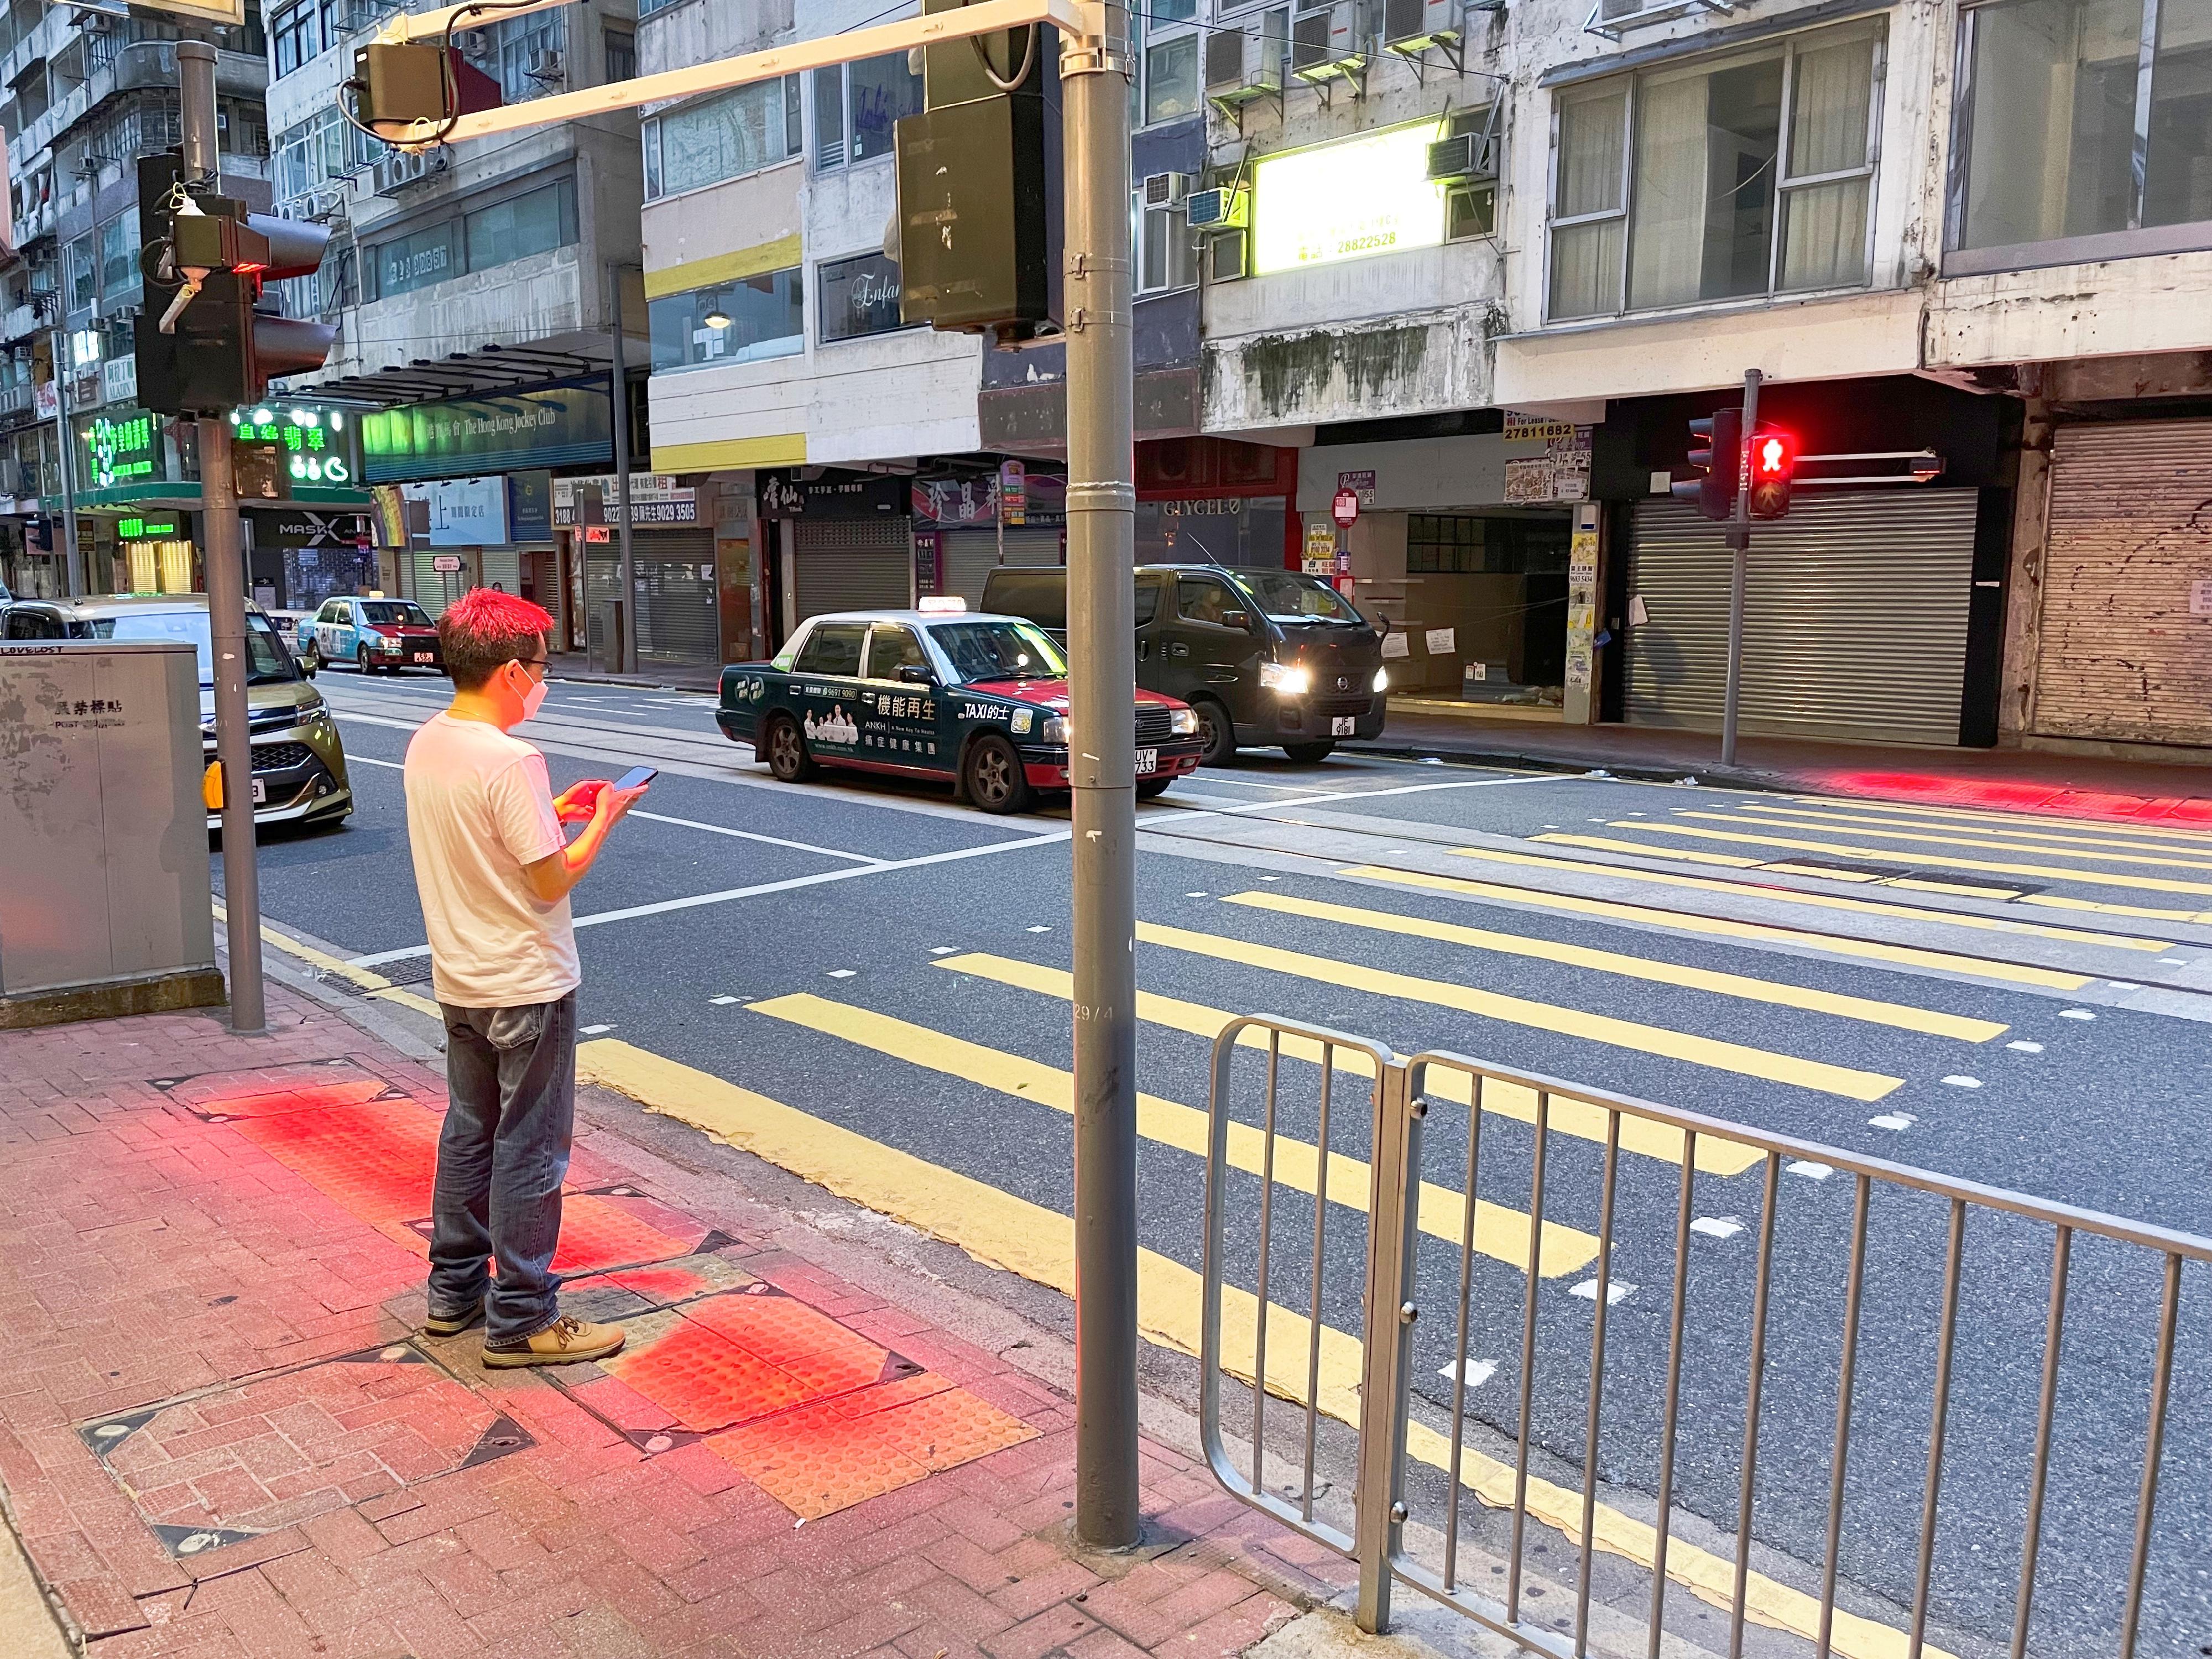 The Transport Department today (July 5) said that the department has launched a six-month trial to install a new auxiliary device at road crossings which projects a red light onto the waiting area of footpaths when the "red man" symbol is lit. The red light reflected from the ground or mobile device can serve to remind pedestrians that they should not cross the road when the "red man" symbol is lit.